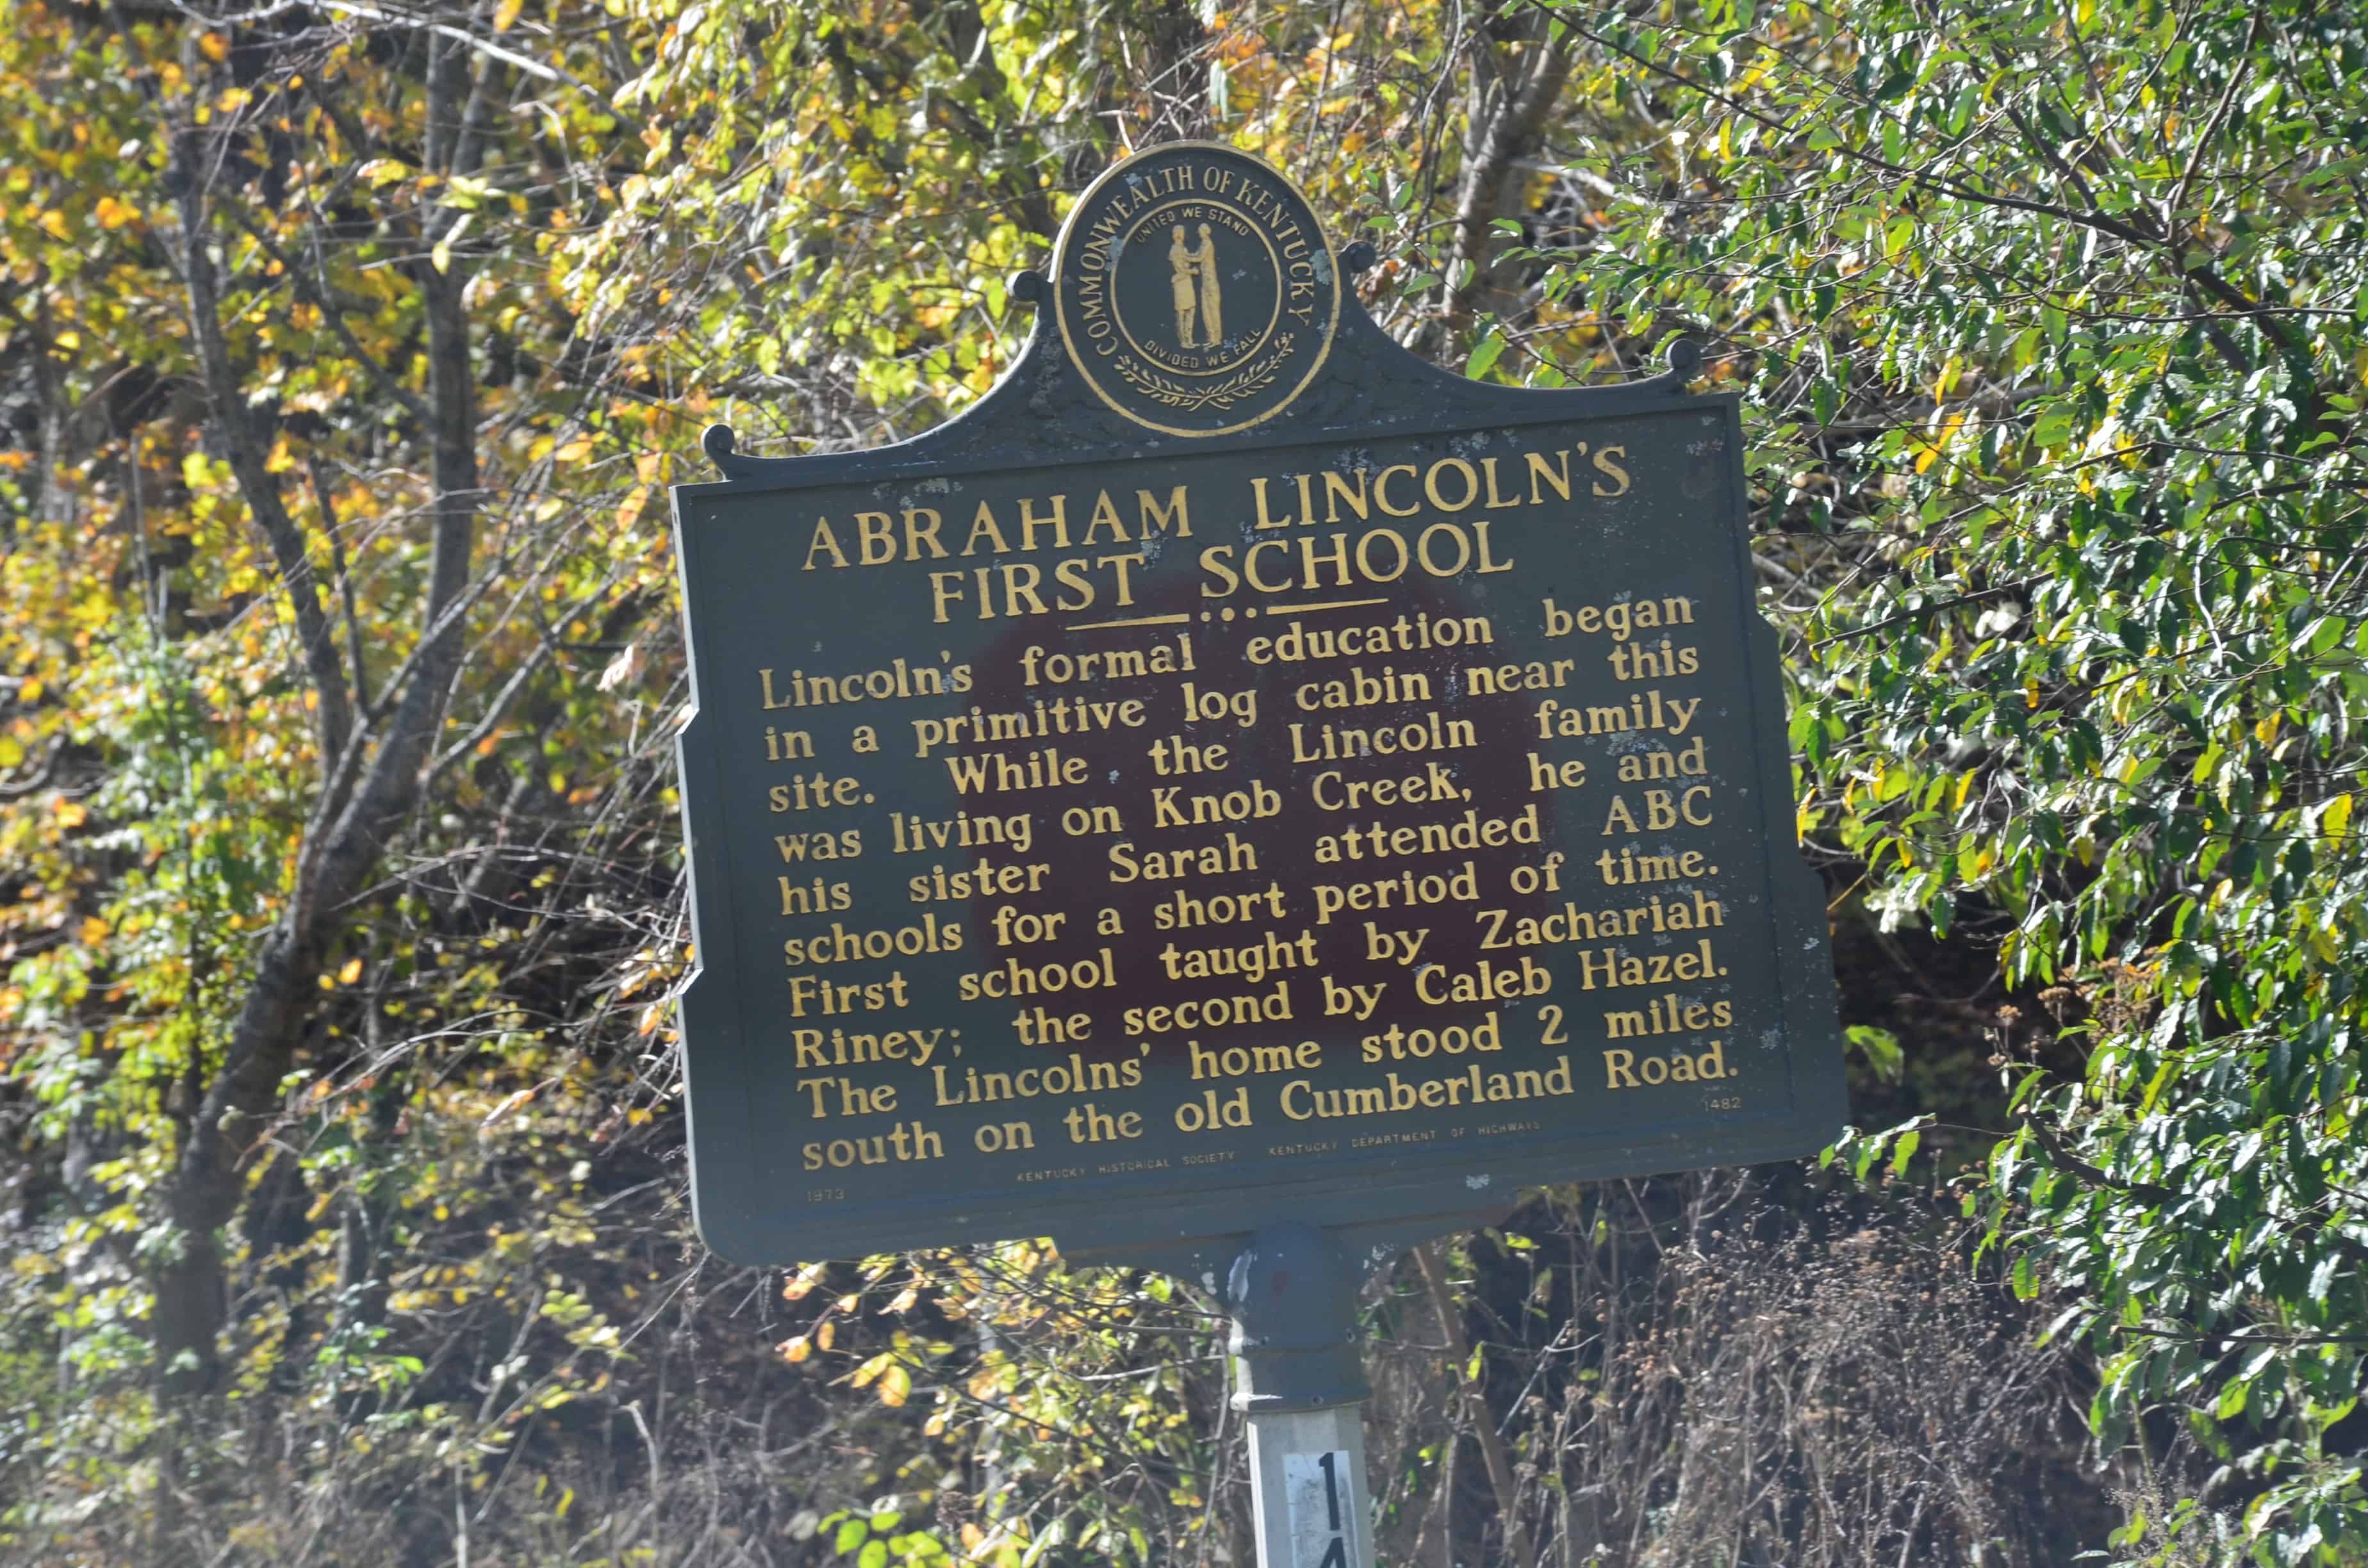 Lincoln's first school historical marker near Abraham Lincoln Birthplace National Historical Park in Kentucky